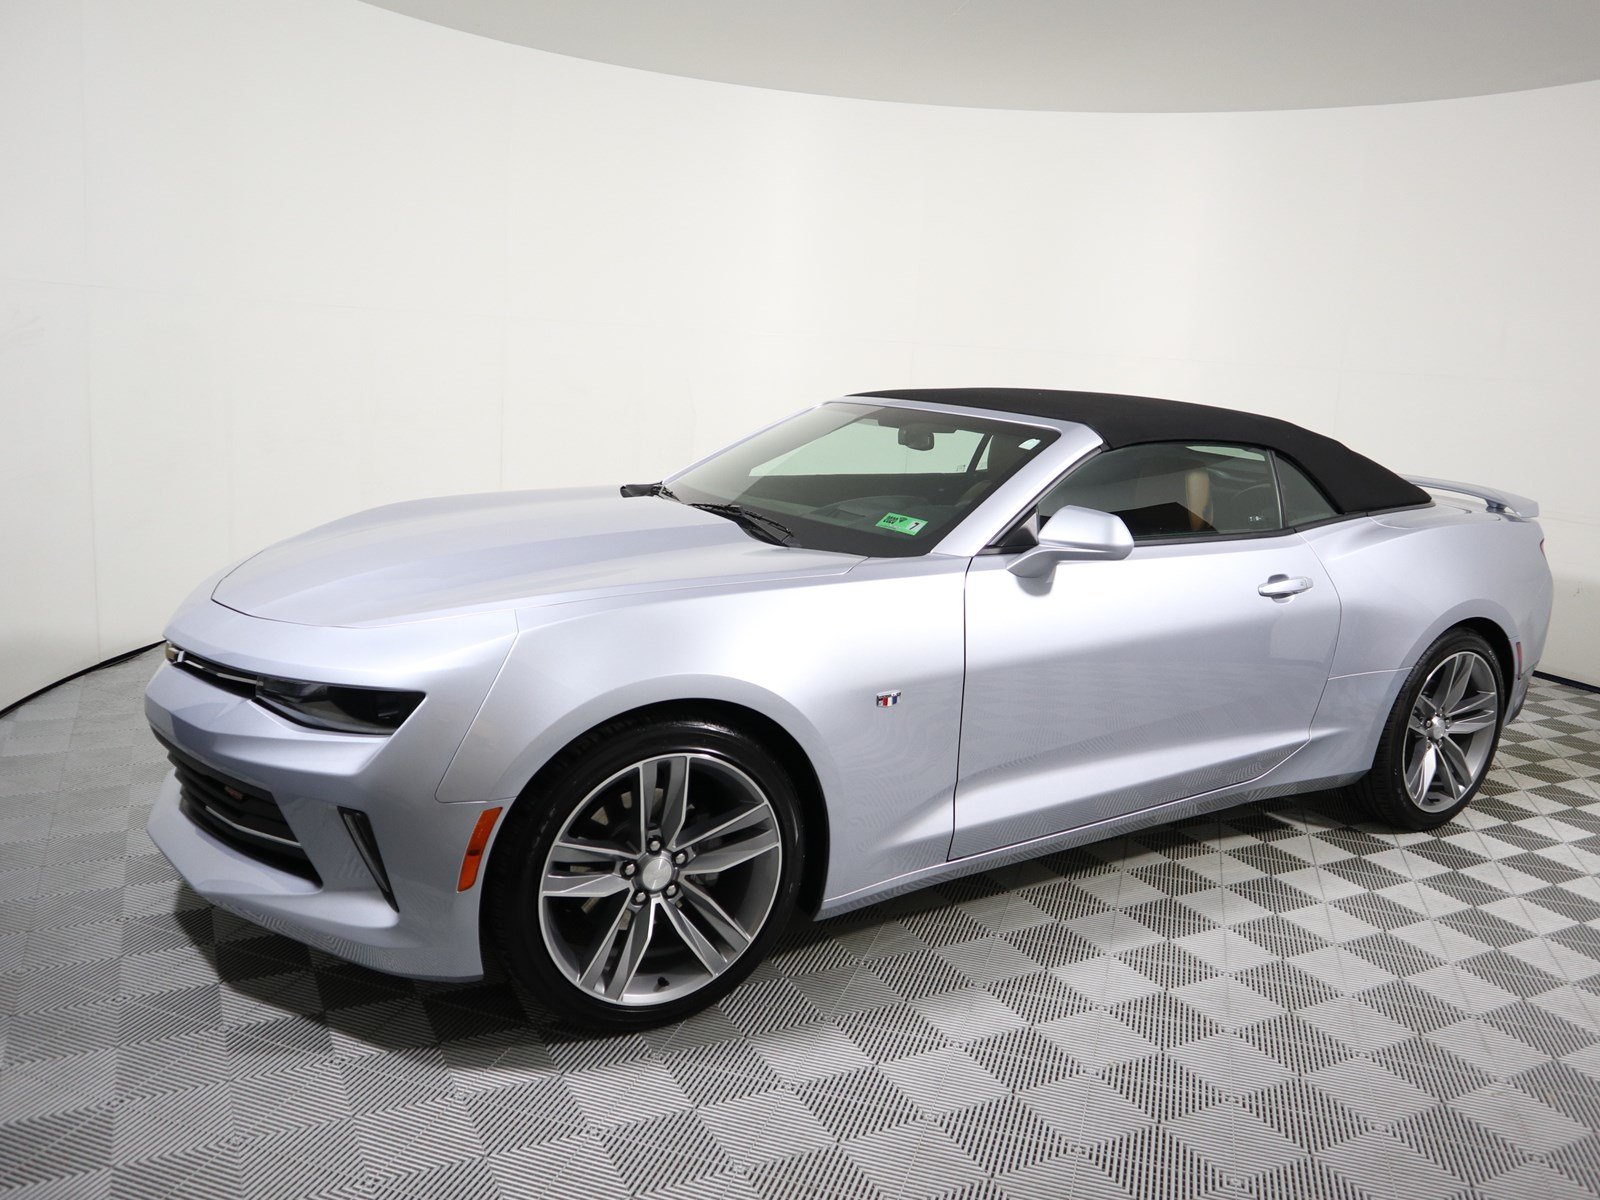 PreOwned 2017 Chevrolet Camaro 2LT Convertible in